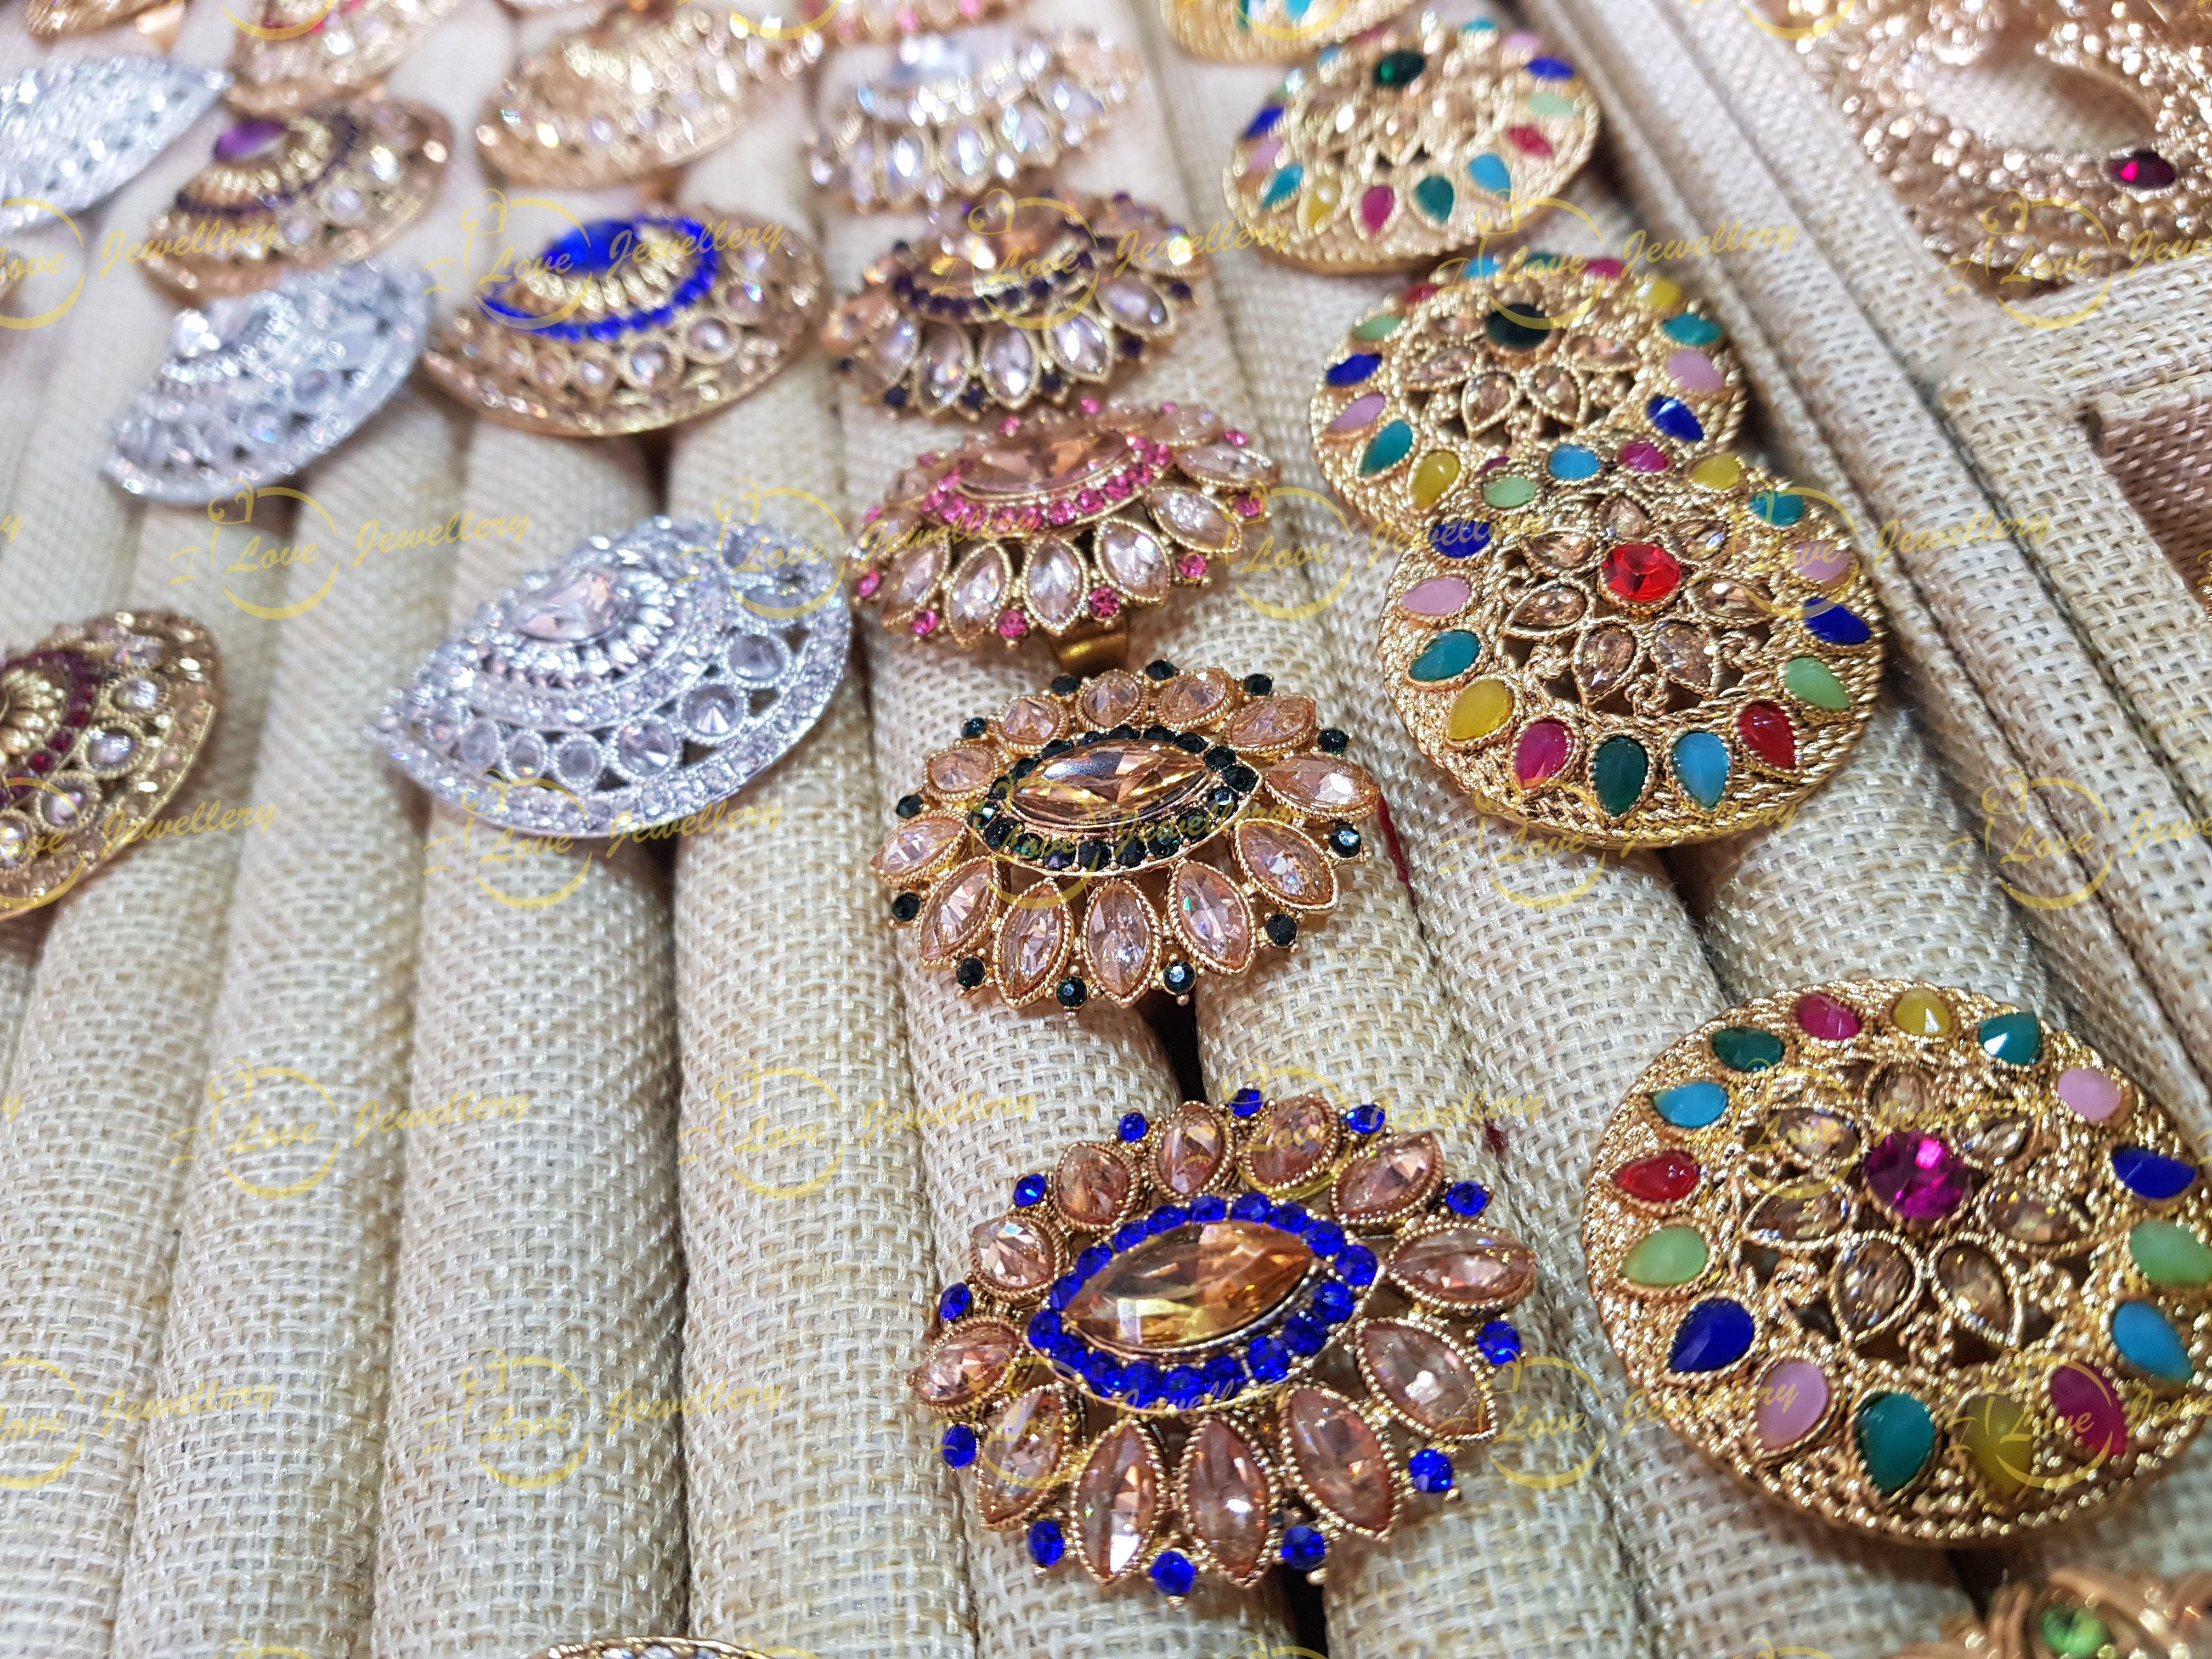 Indian Pakistani rings collection - Fashion rings - casual rings - bridal rings - wholesale Pakistani jewellery - bespoke Pakistani jewellery